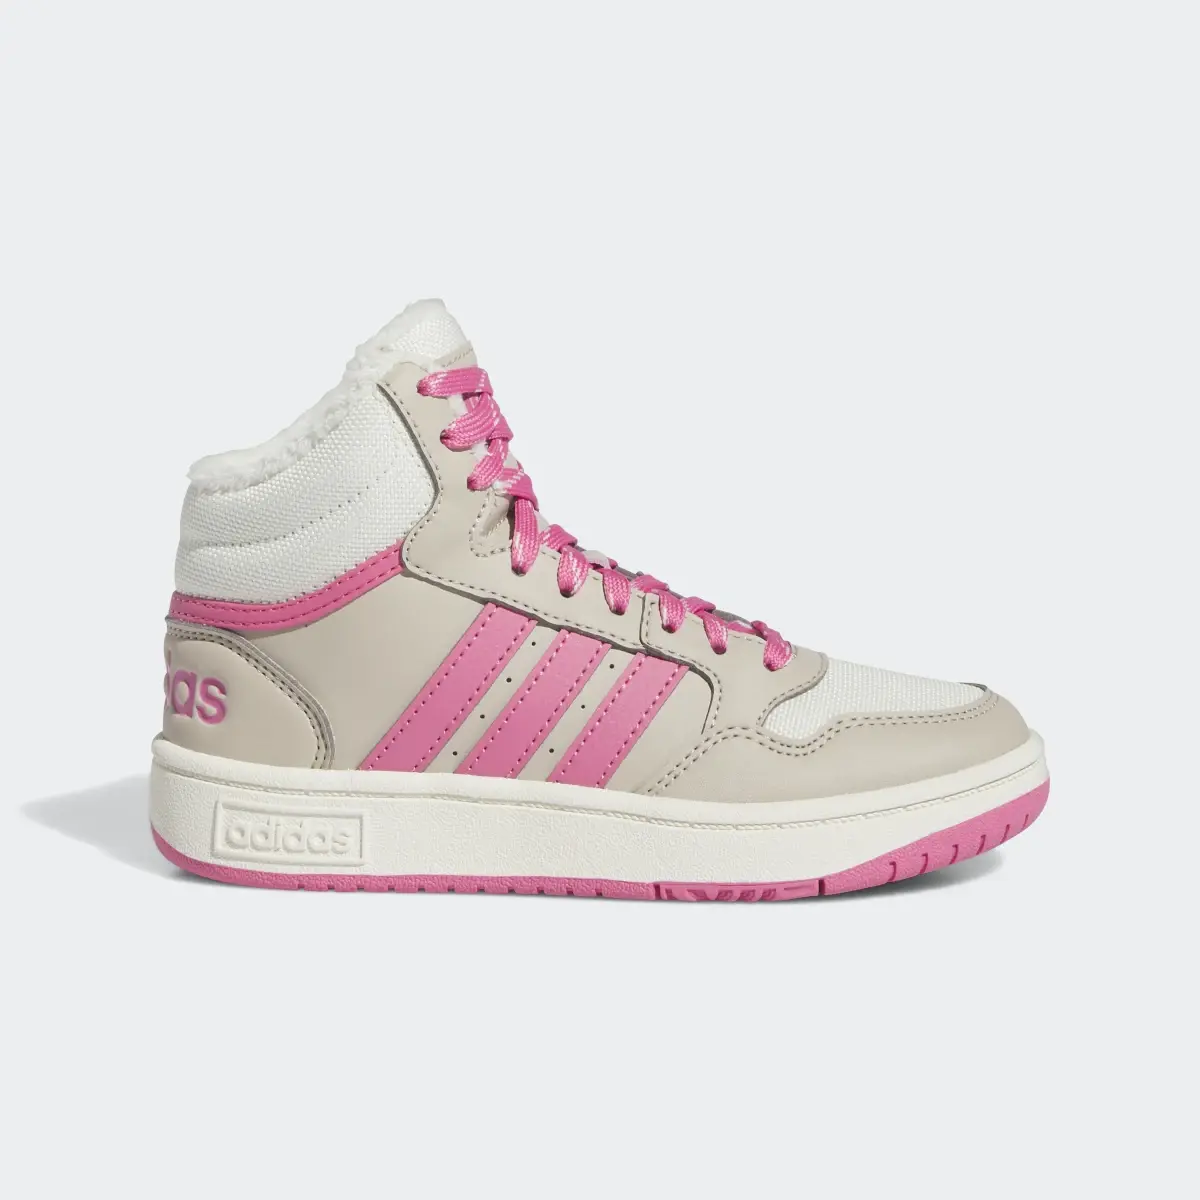 Adidas Hoops Mid 3.0 Shoes Kids. 2